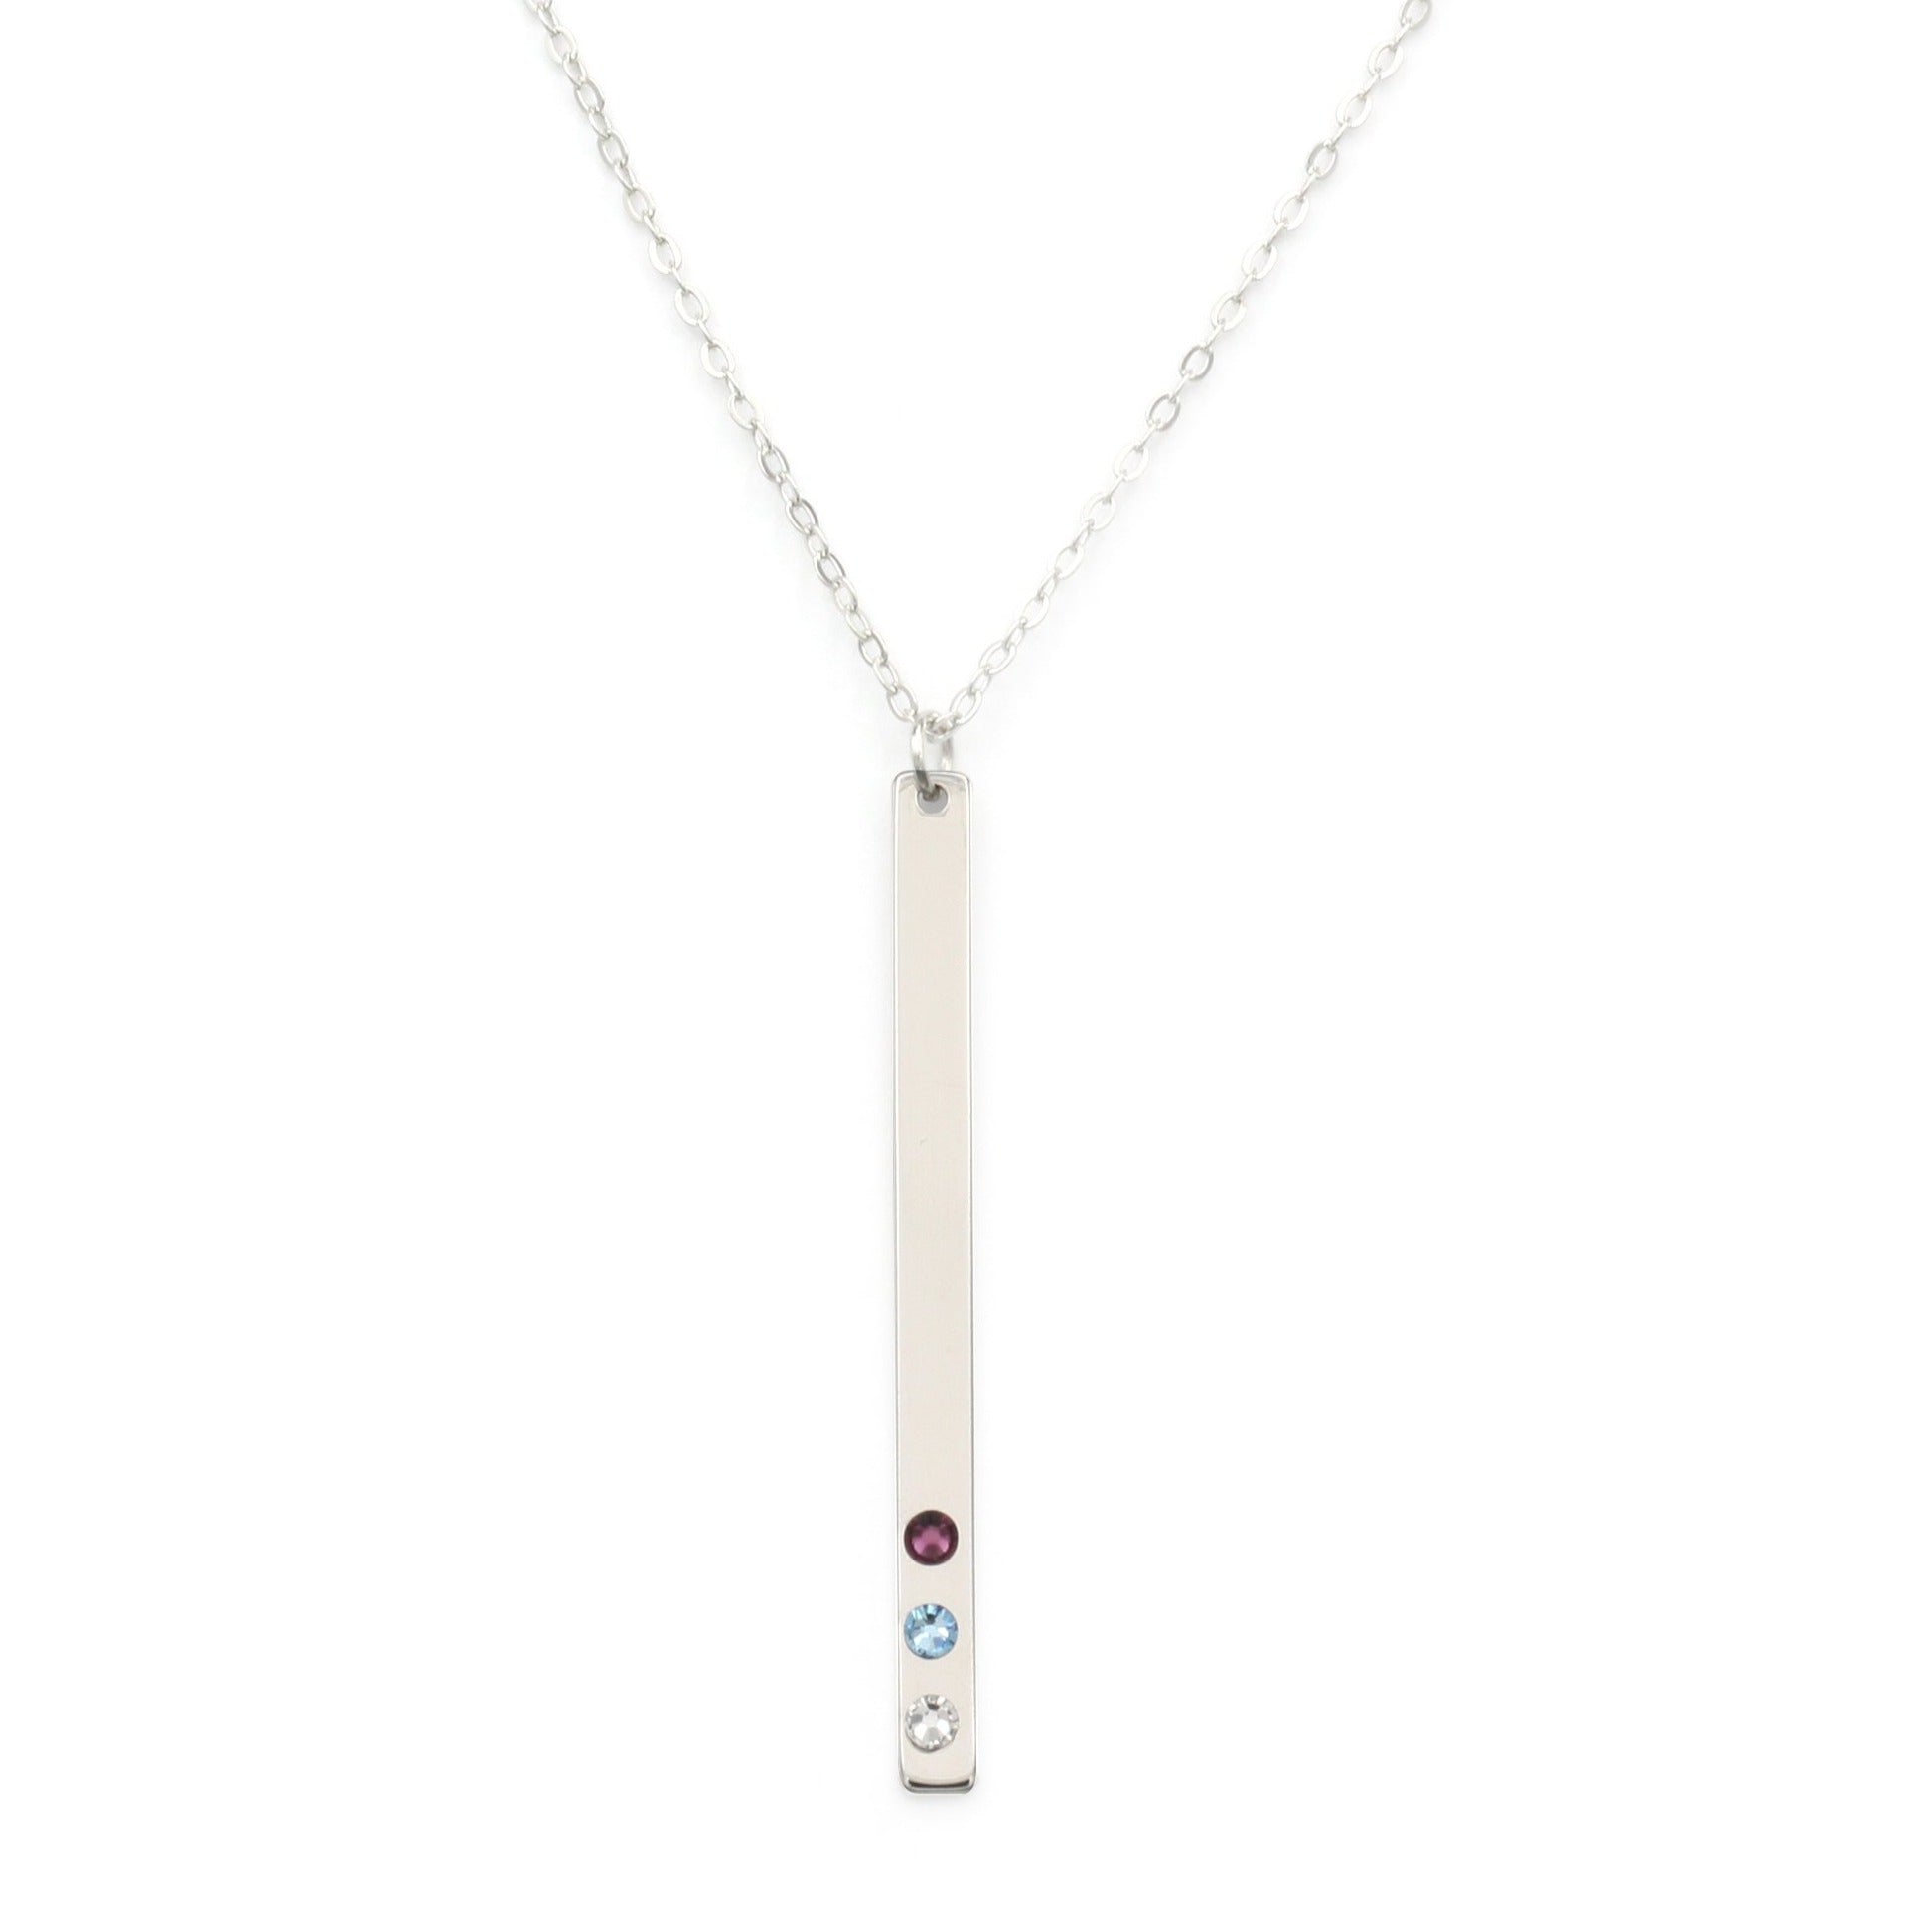 Buy KIS-Jewelry Birthstone Bar Necklace, December at Amazon.in